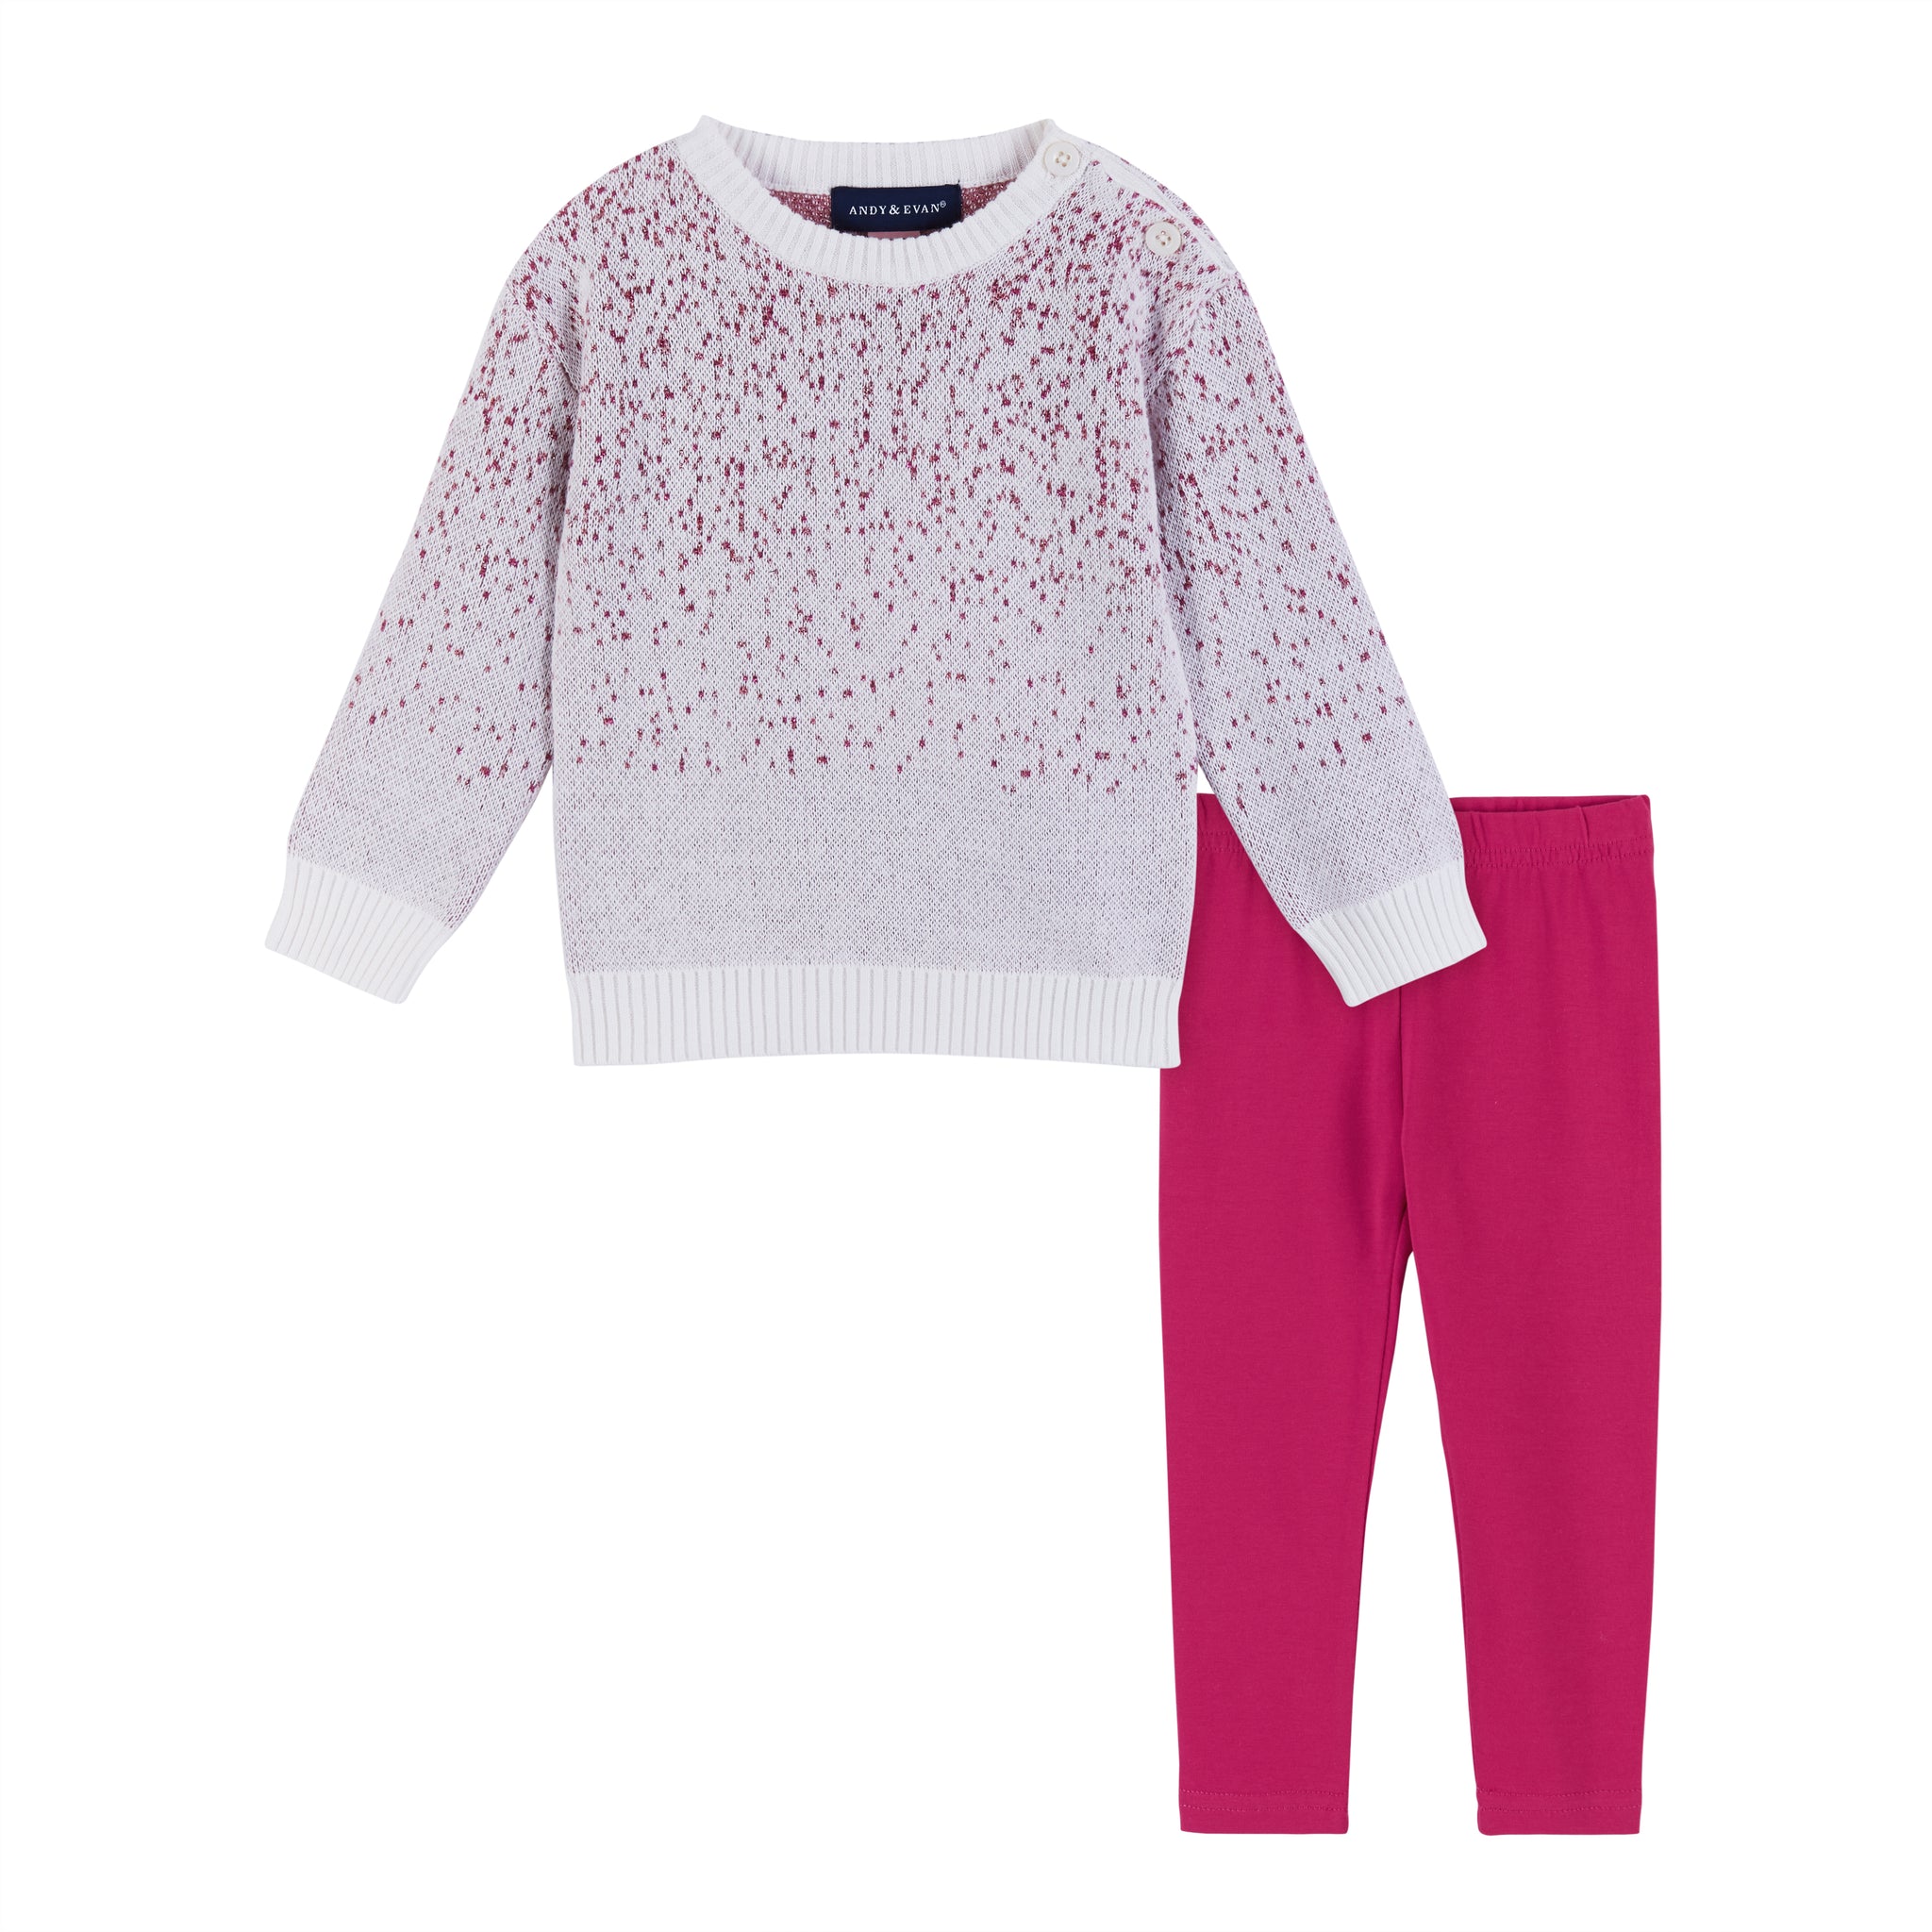 Andy & Evan Girls Ombre Sweater Set